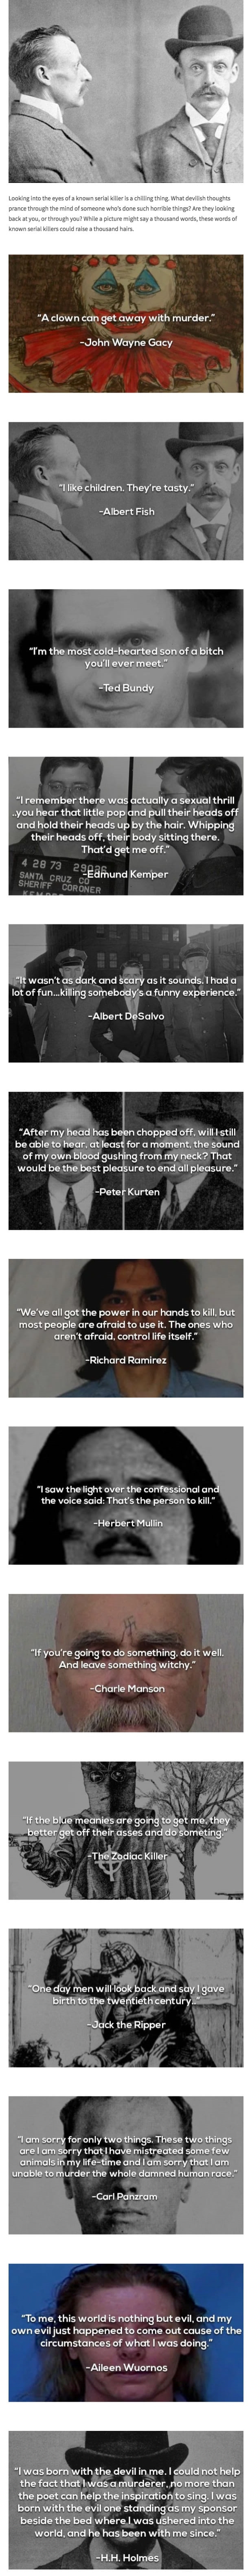 Hair-raising quotes from serial killers